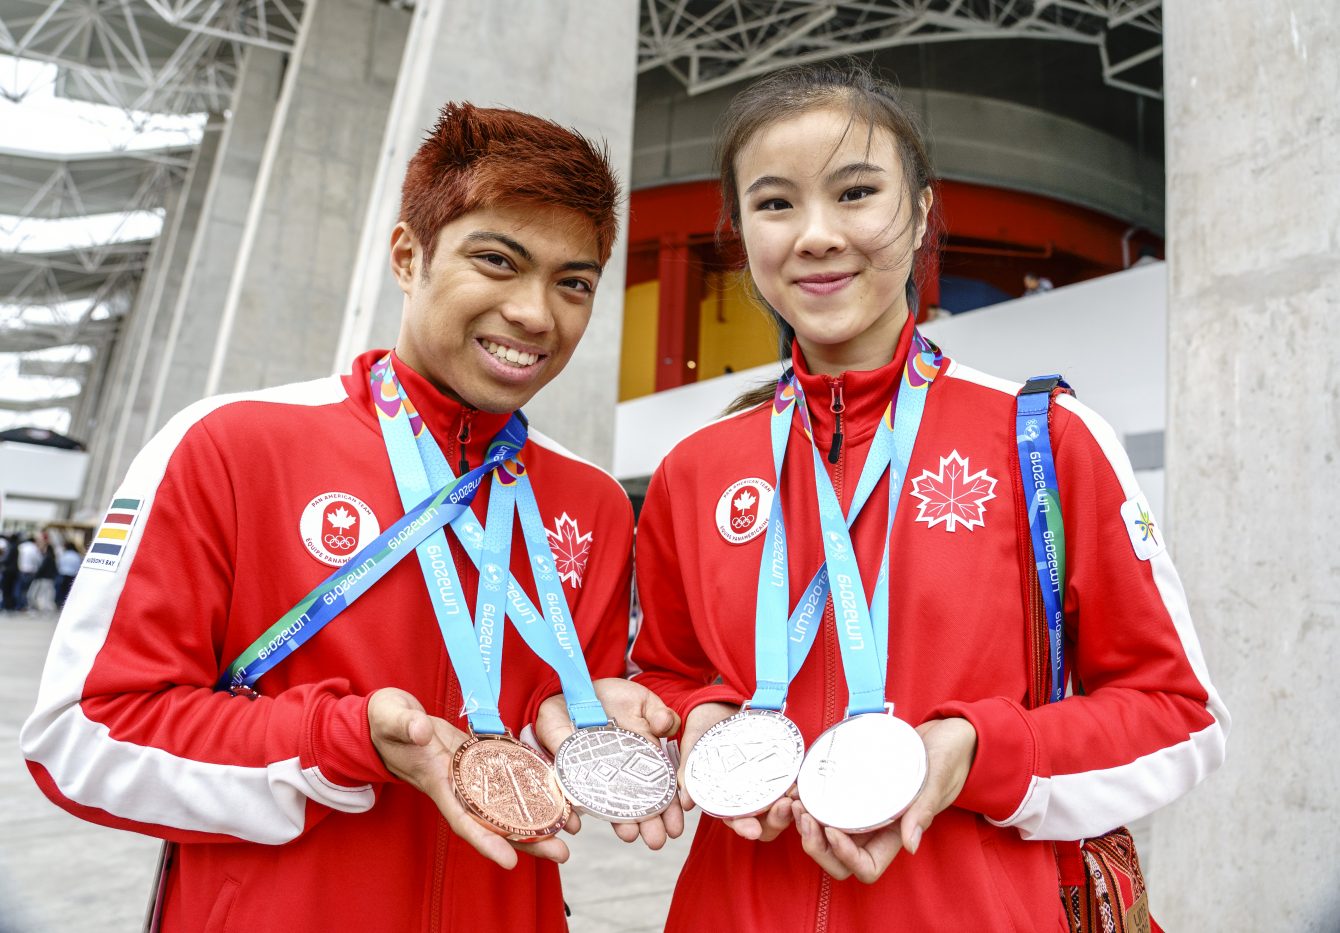 AJ Assadian (left) and Michelle Lee, pose for photos with their medals at Lima 2019.